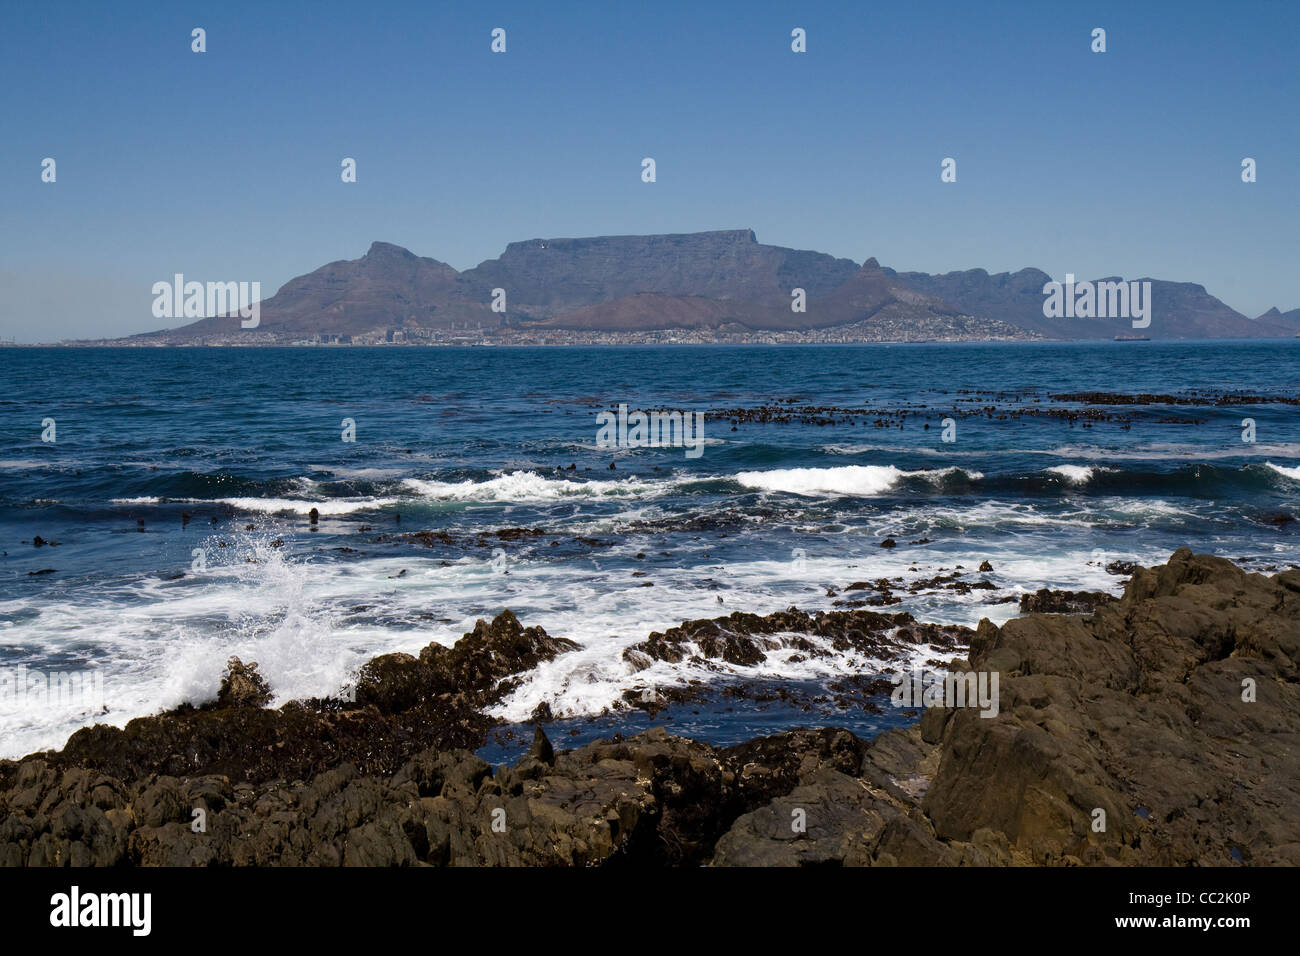 A view of Table Mountain from Robyn Island, Cape Town Stock Photo - Alamy